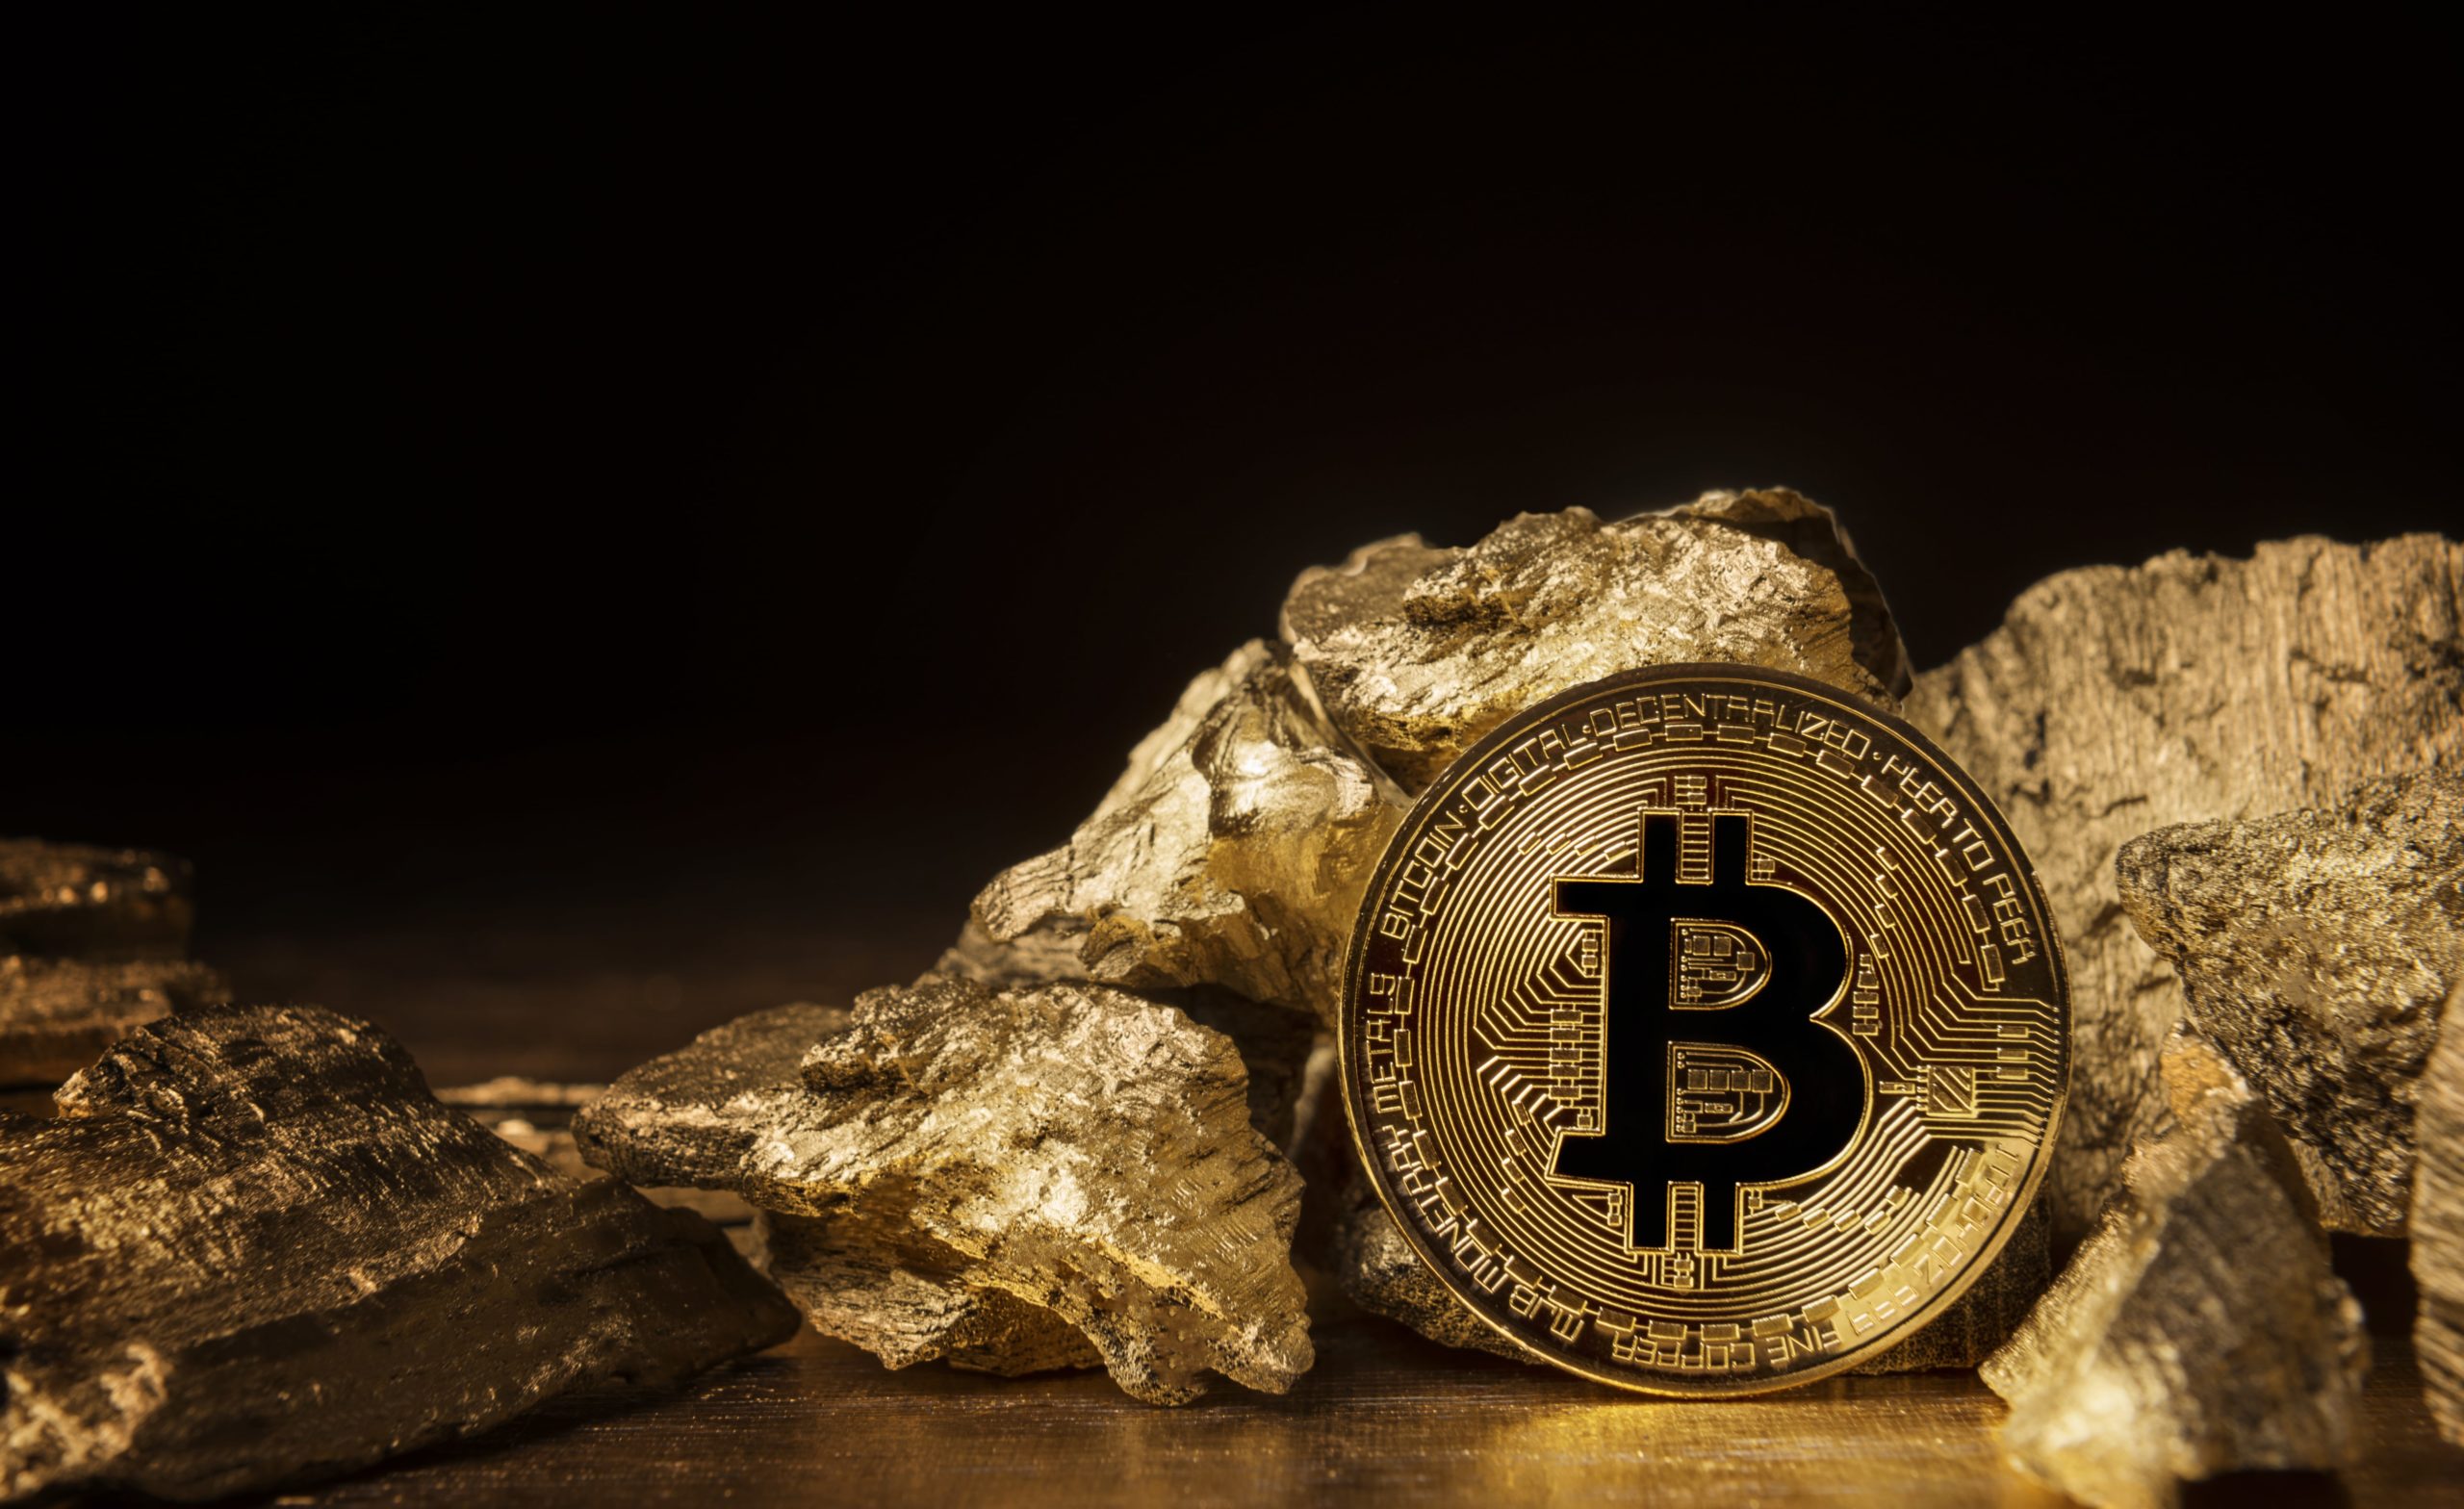 "Bitcoin will replace gold," says a well-known analyst, who likened it to a precious metal